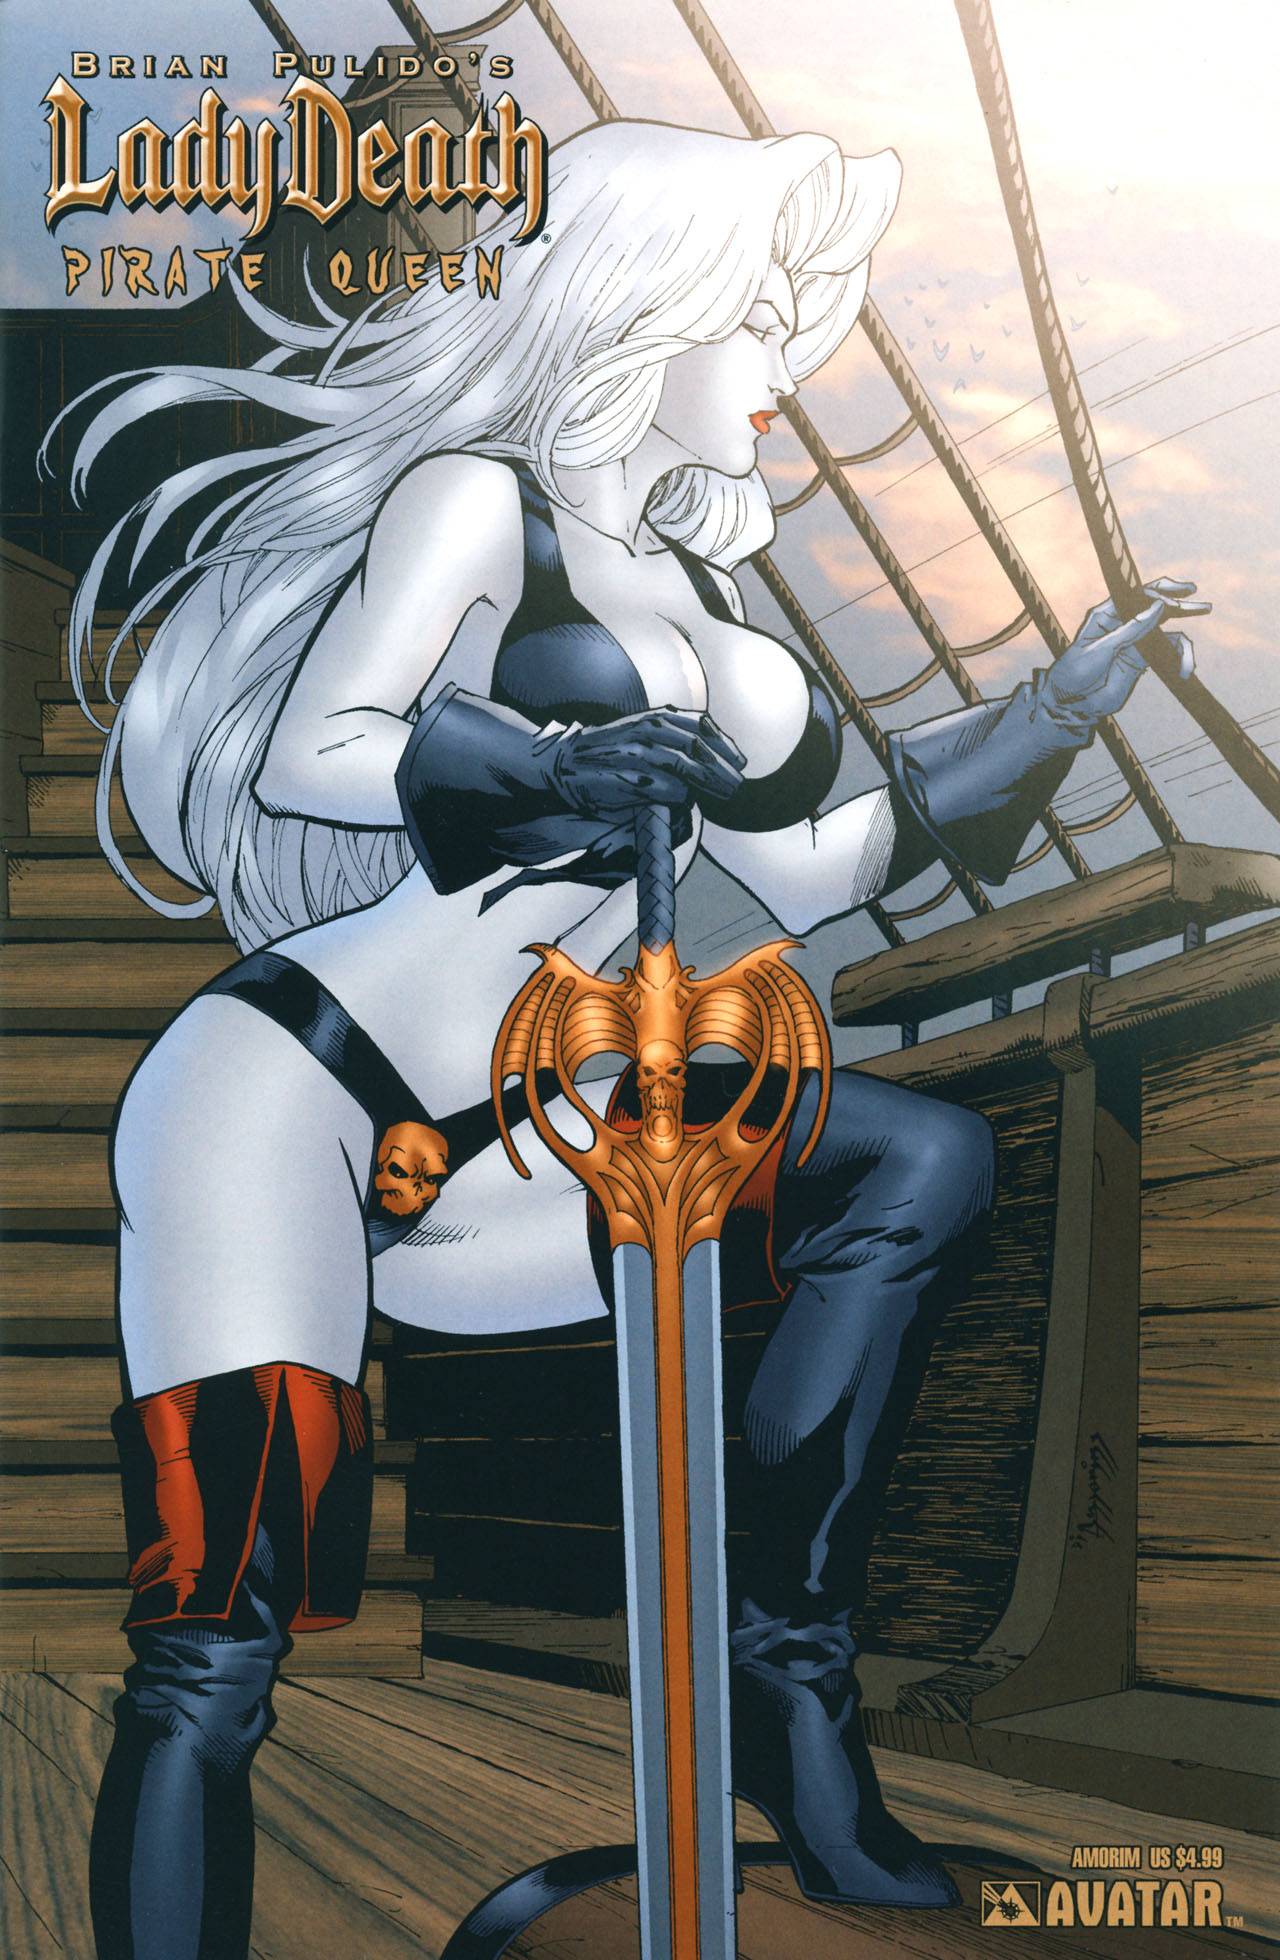 Read online Lady Death Pirate Queen comic -  Issue # Full - 5